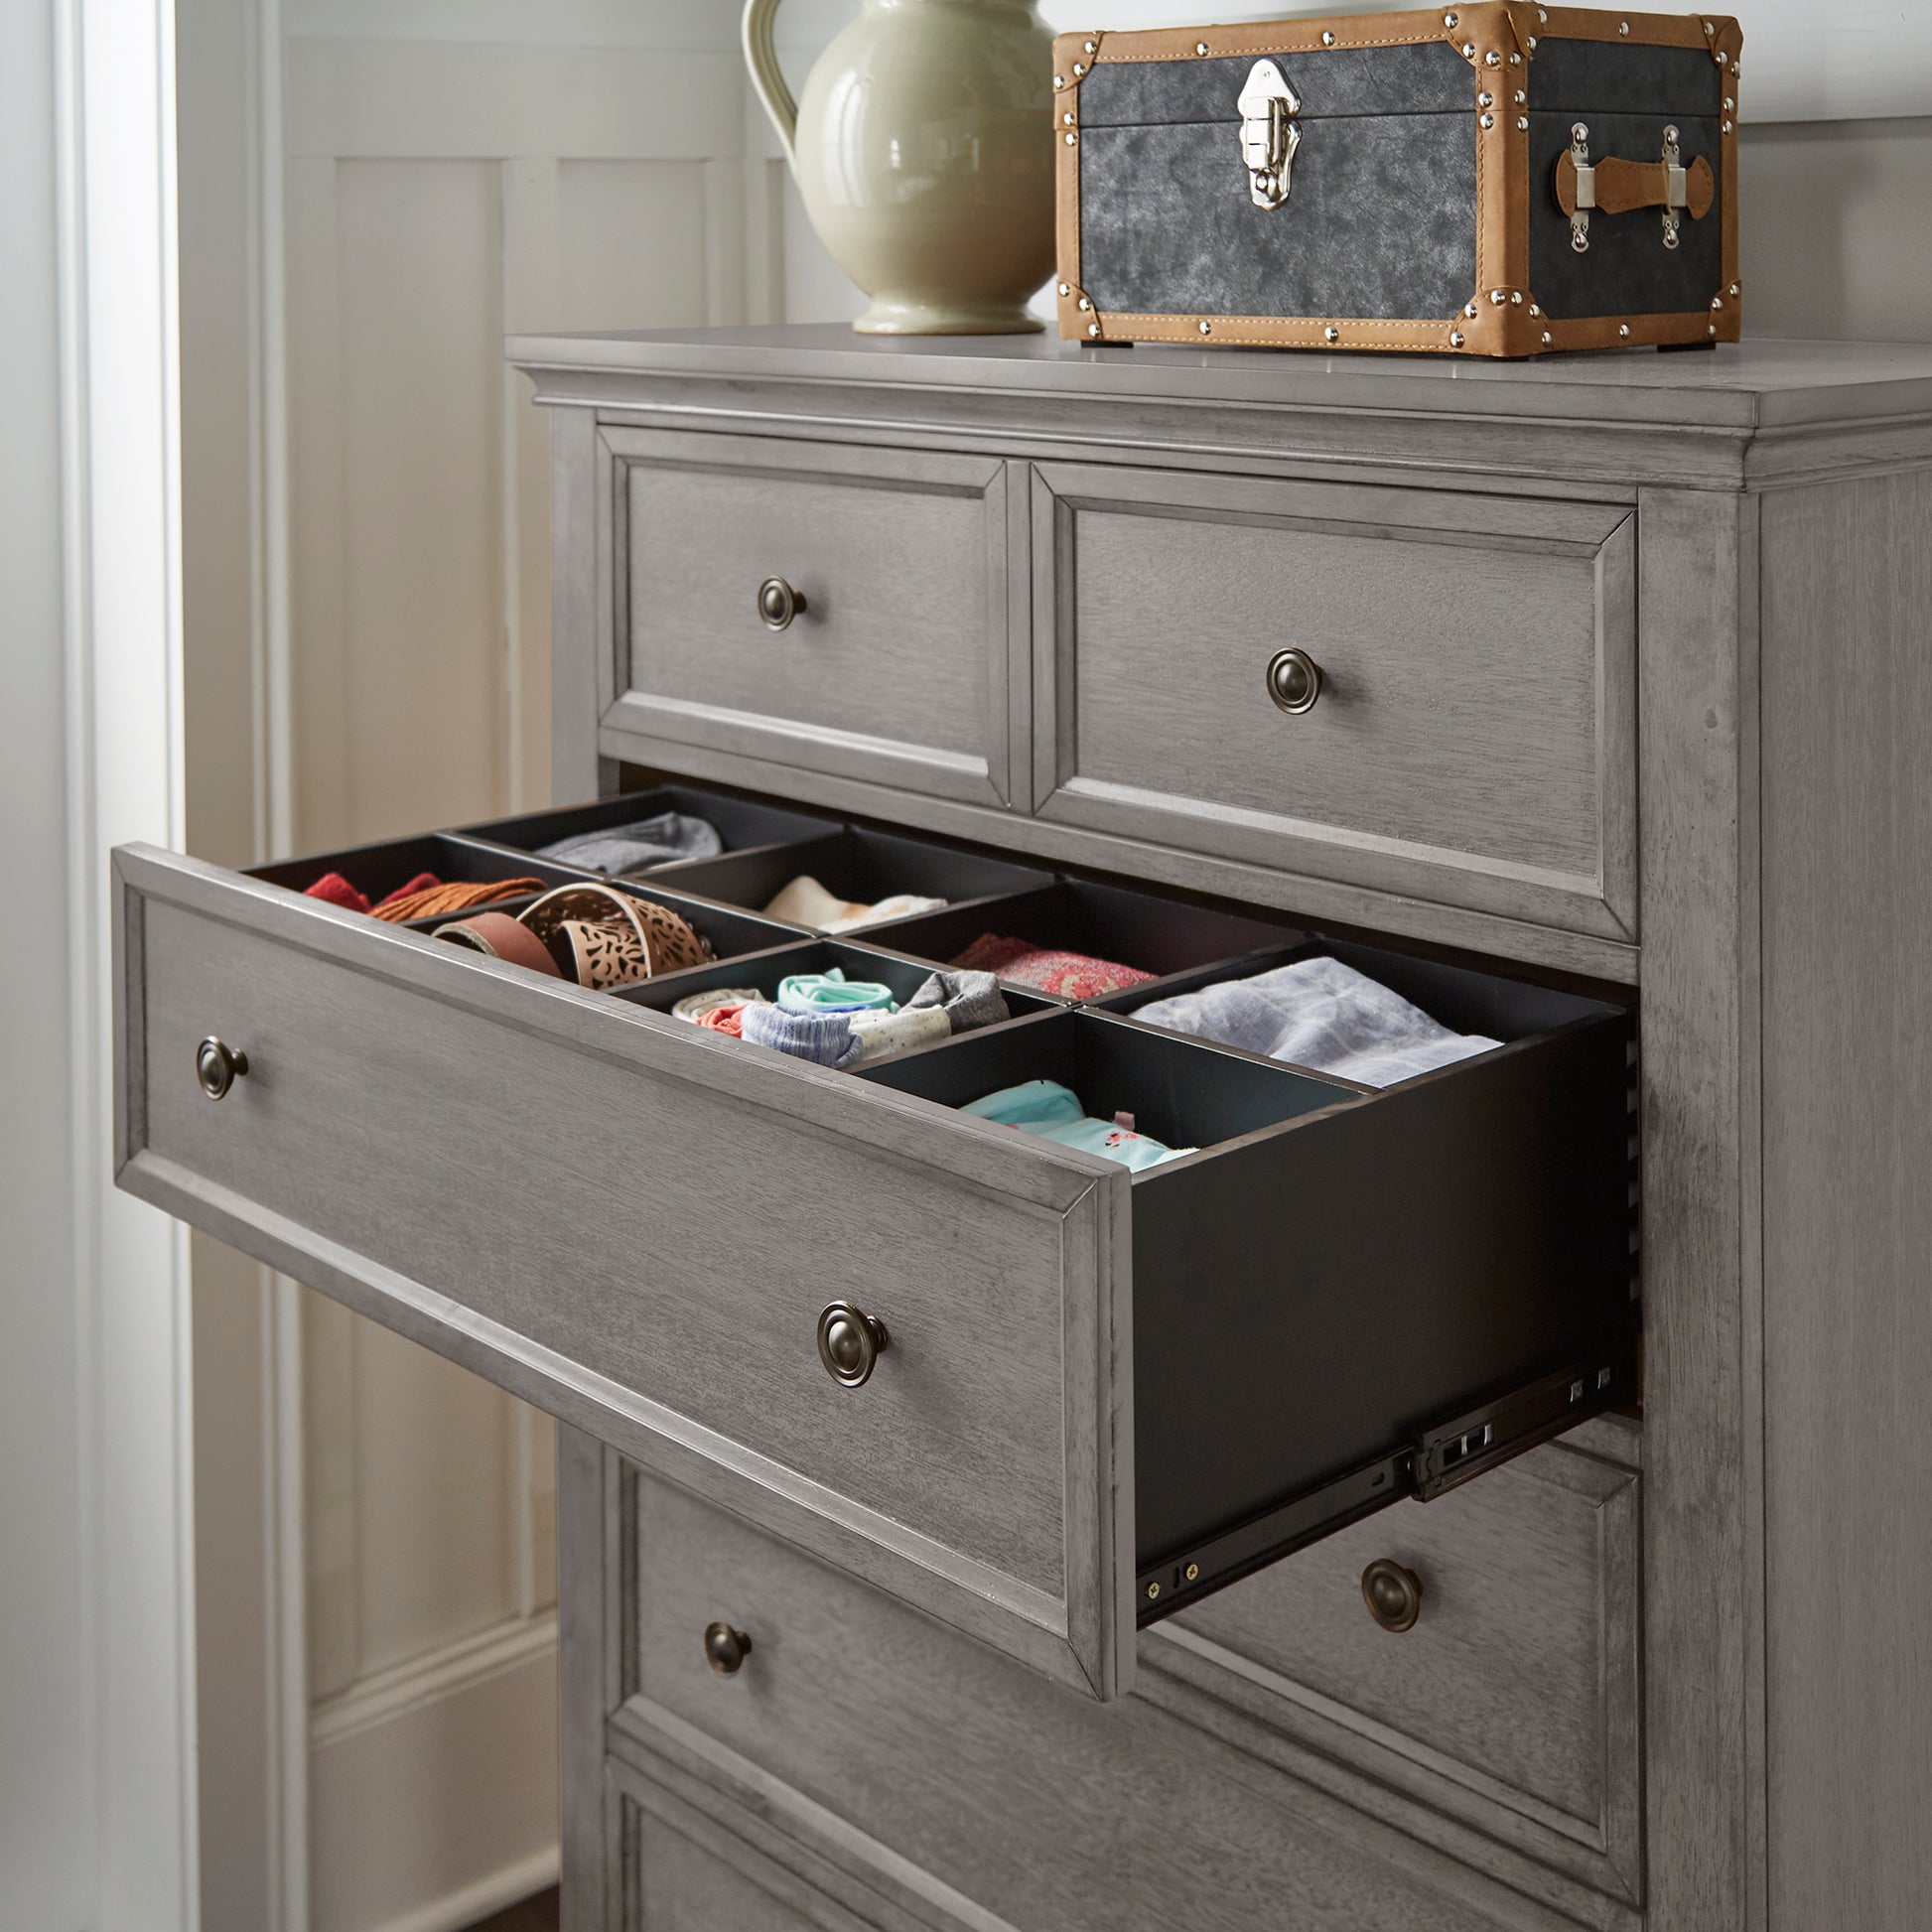  Dressers & Chests Of Drawers - Grain Wood Furniture / Dressers  & Chests Of Drawe: Home & Kitchen